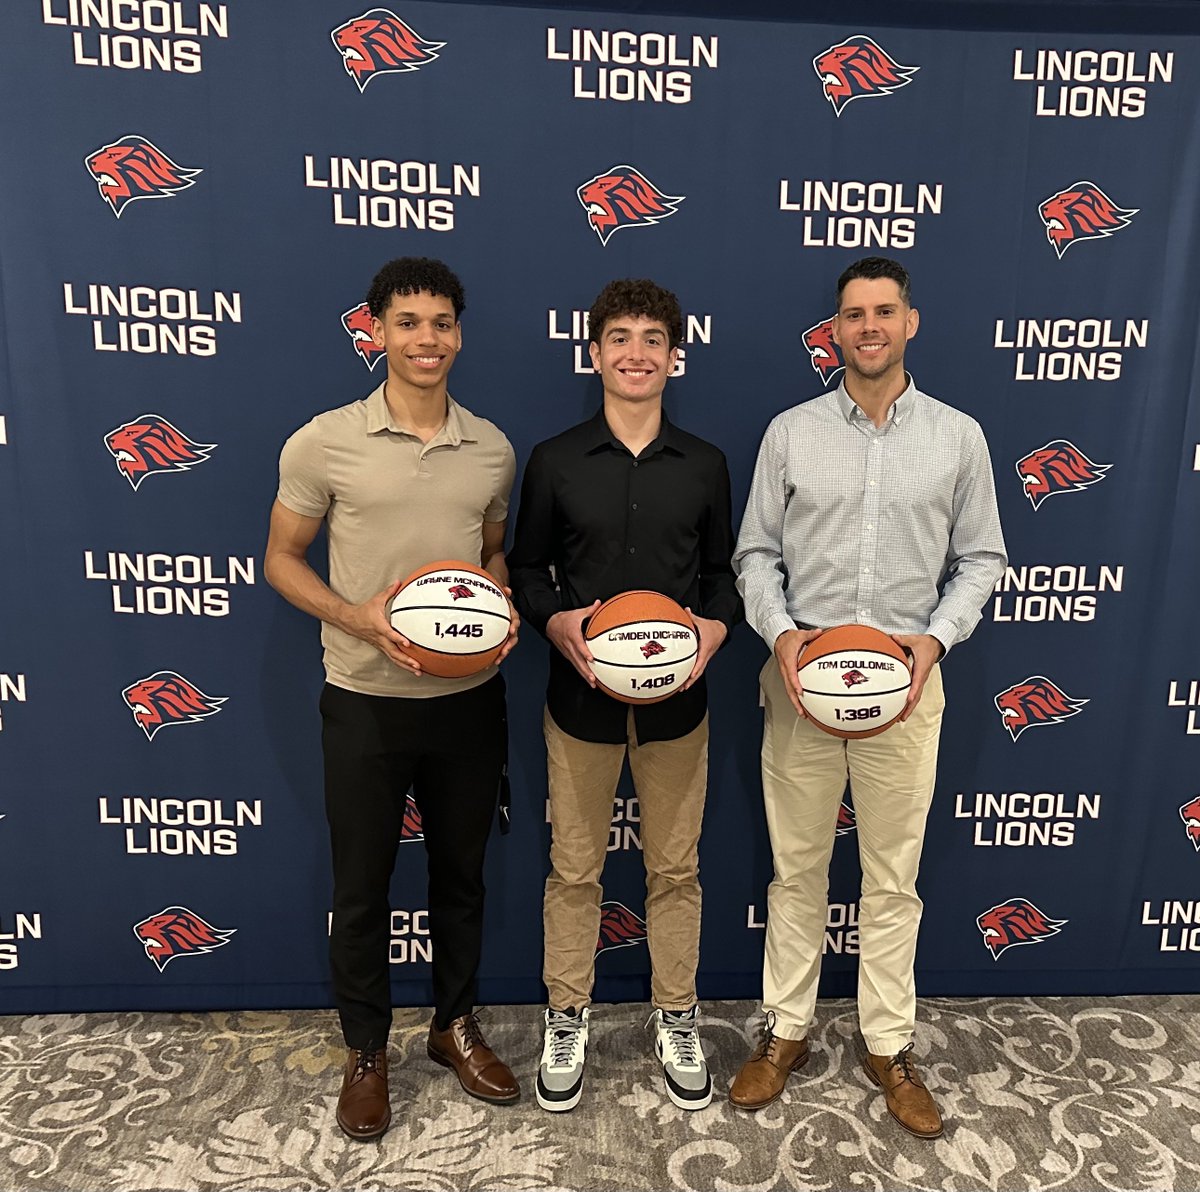 Special moment between the three all time leading scorers in Lincoln Boys Basketball history! 

Tom Coulombe ‘07, record of 1,396 points stood for 17 years, until broken by Camden DiChiara (1,408) & Wayne McNamara (1,445) this past winter!

@LHSRI_Athletics @BWMcGair03